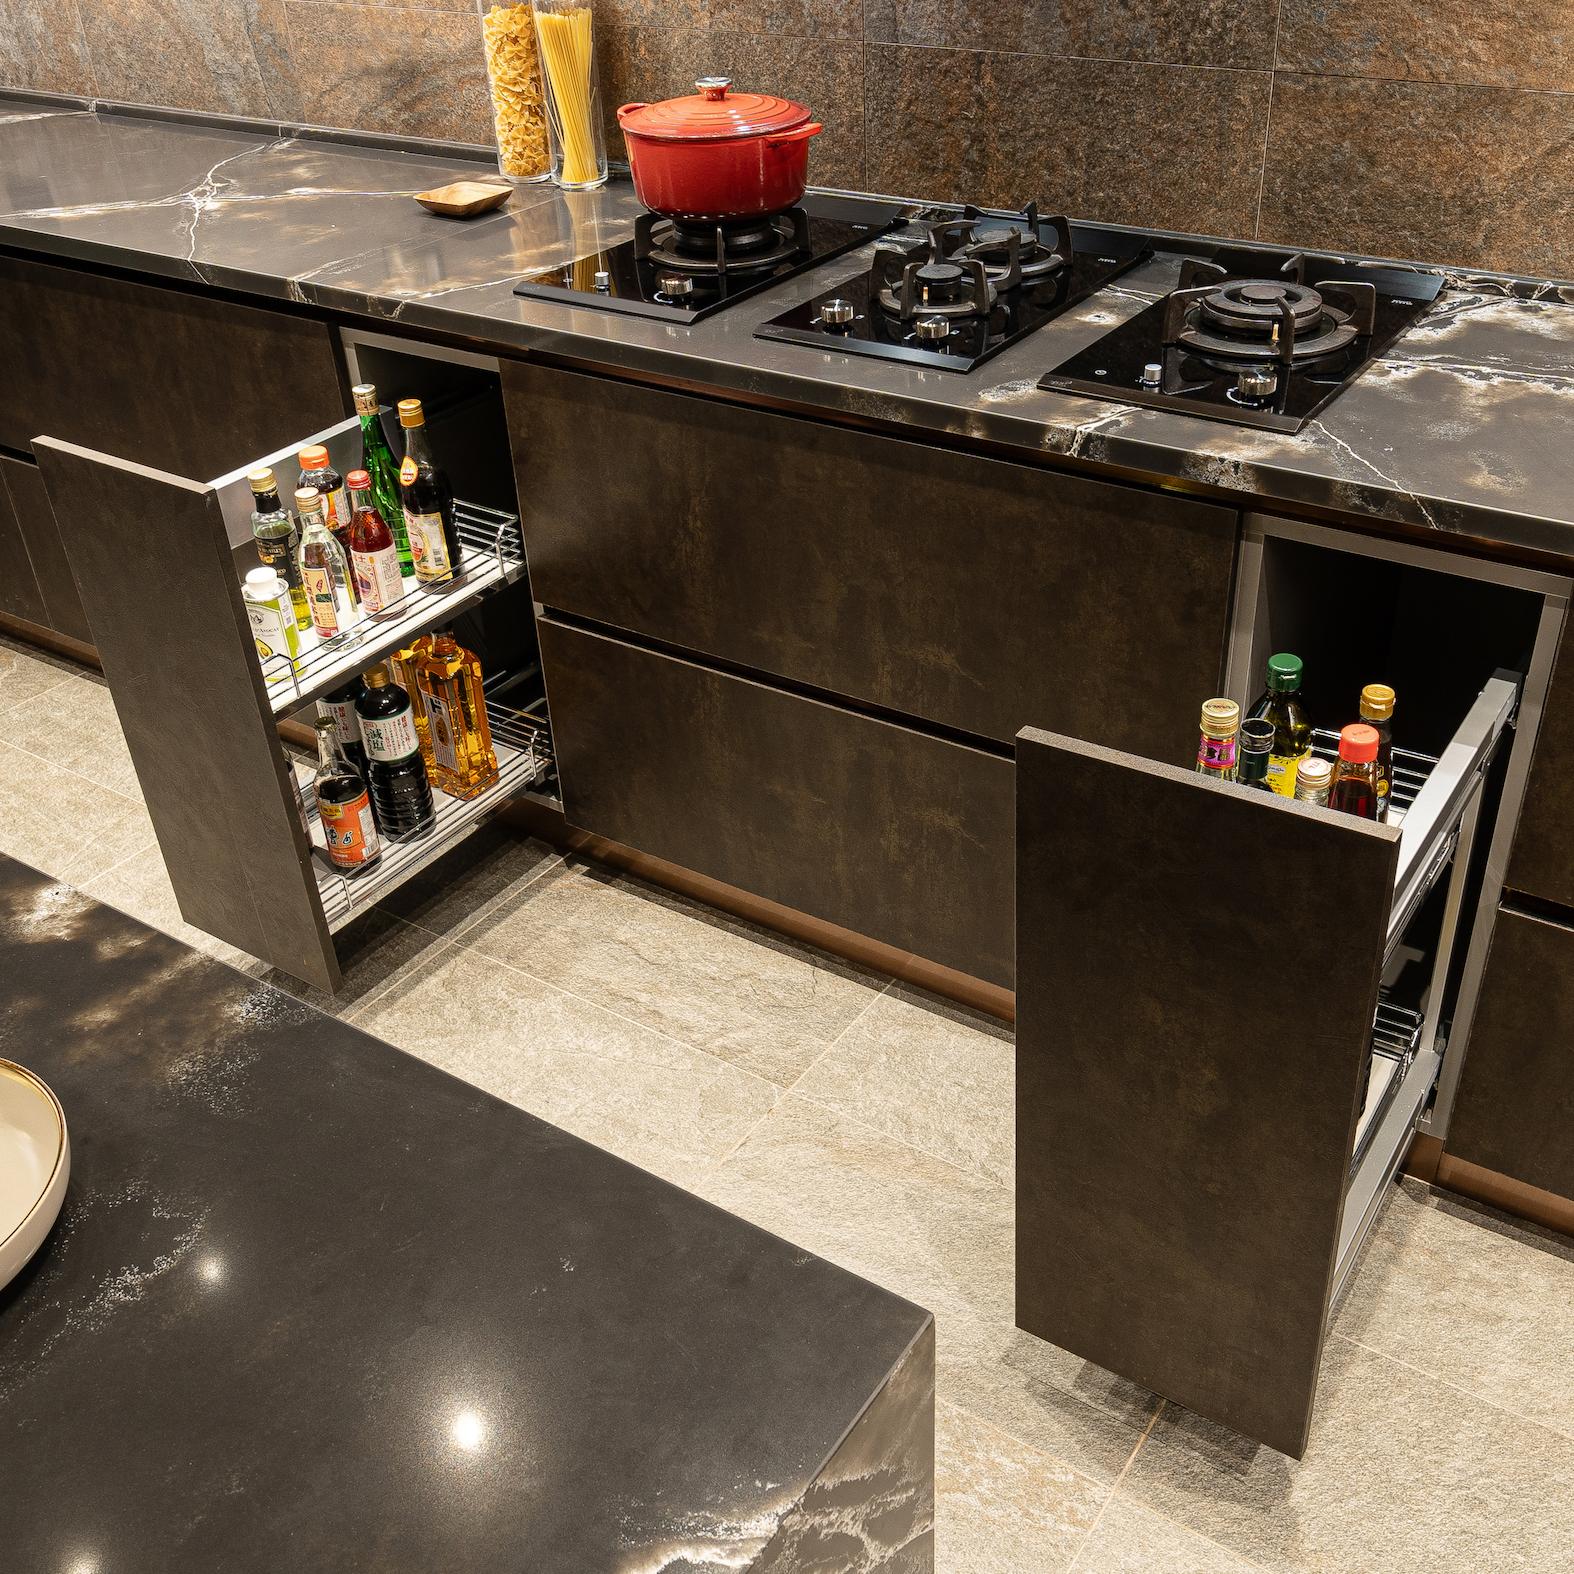 Mia Cucina's New Island Kitchen Interweaves Multiple Materials For Depth and Texture